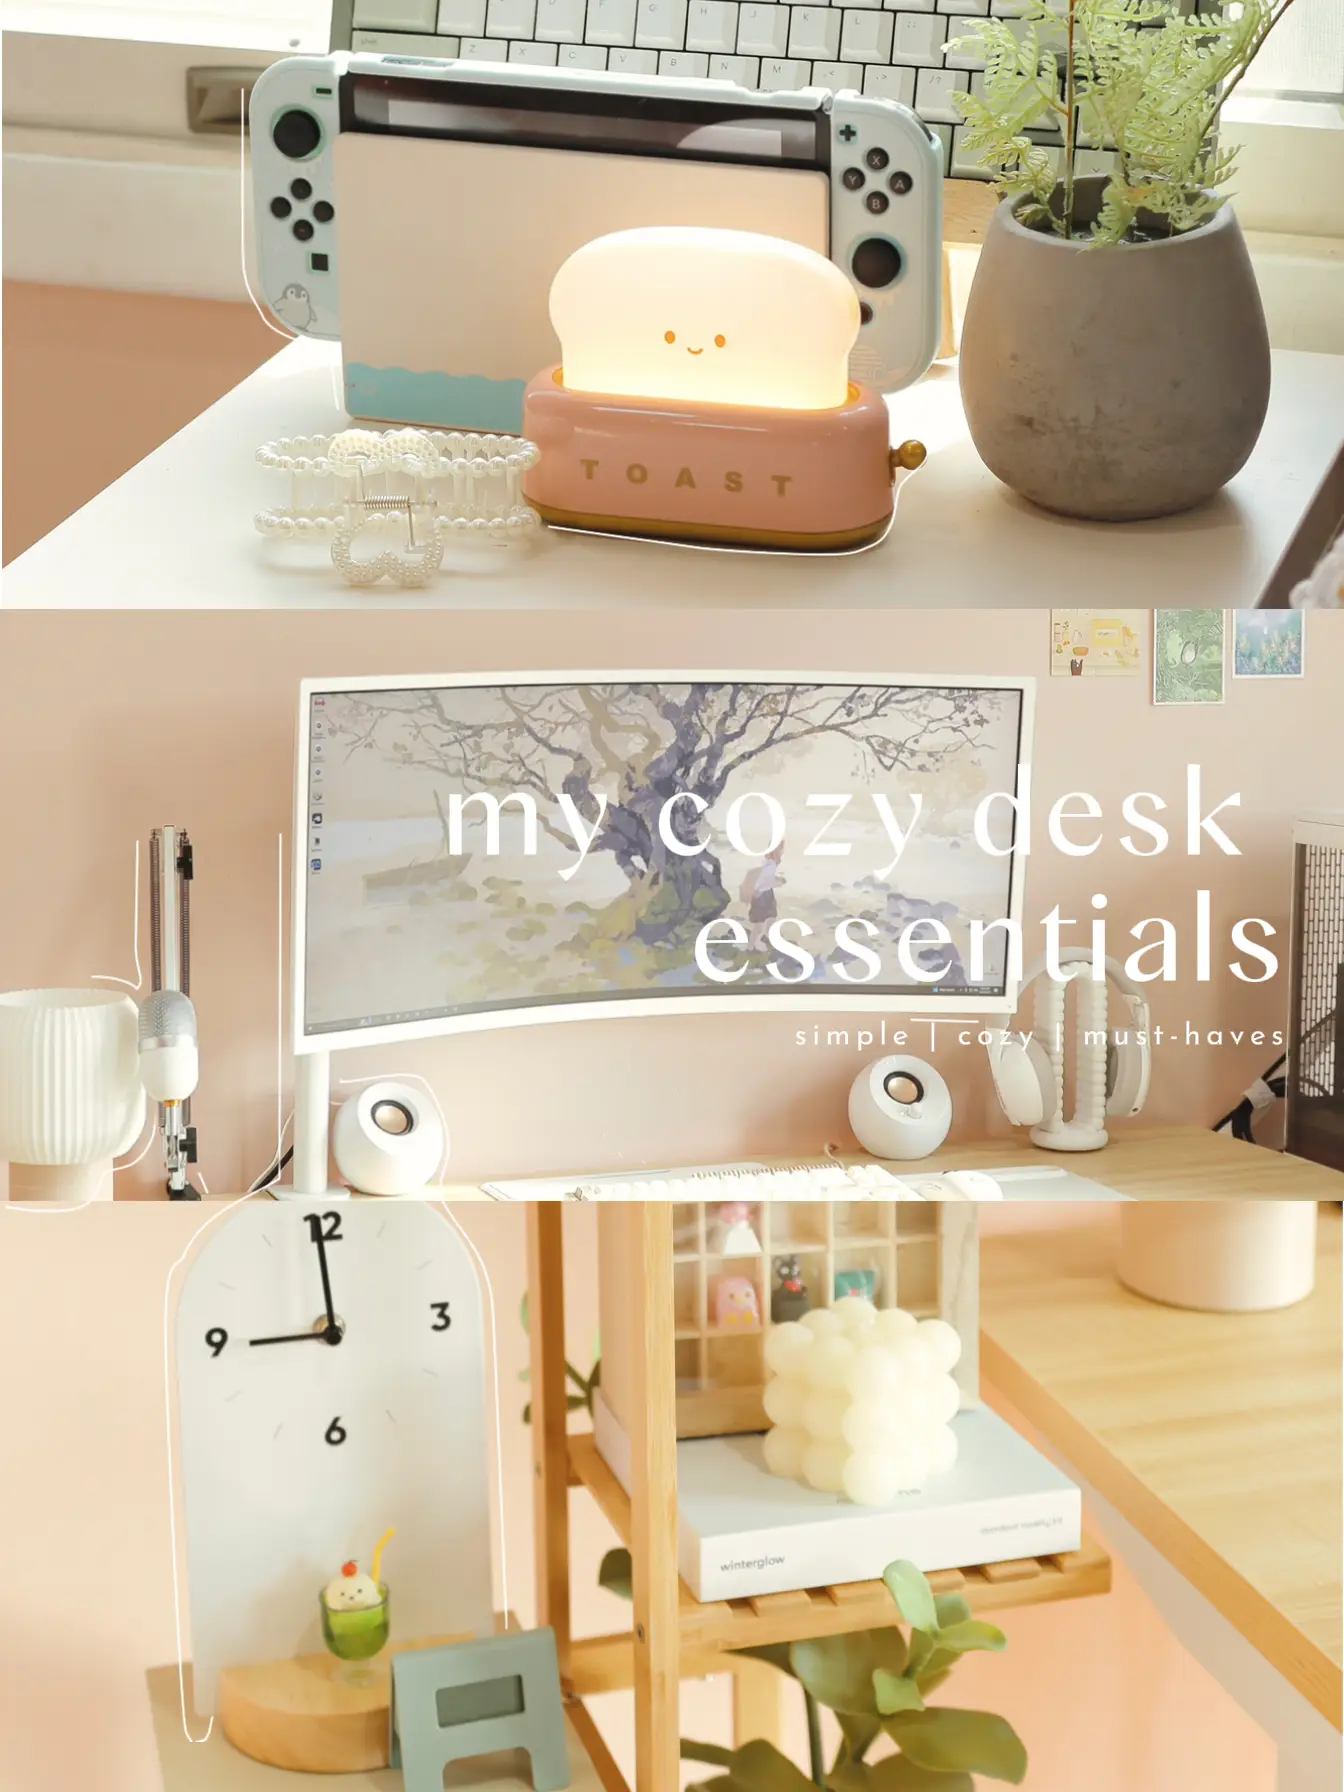 my cozy desk essentials, Gallery posted by menguiny